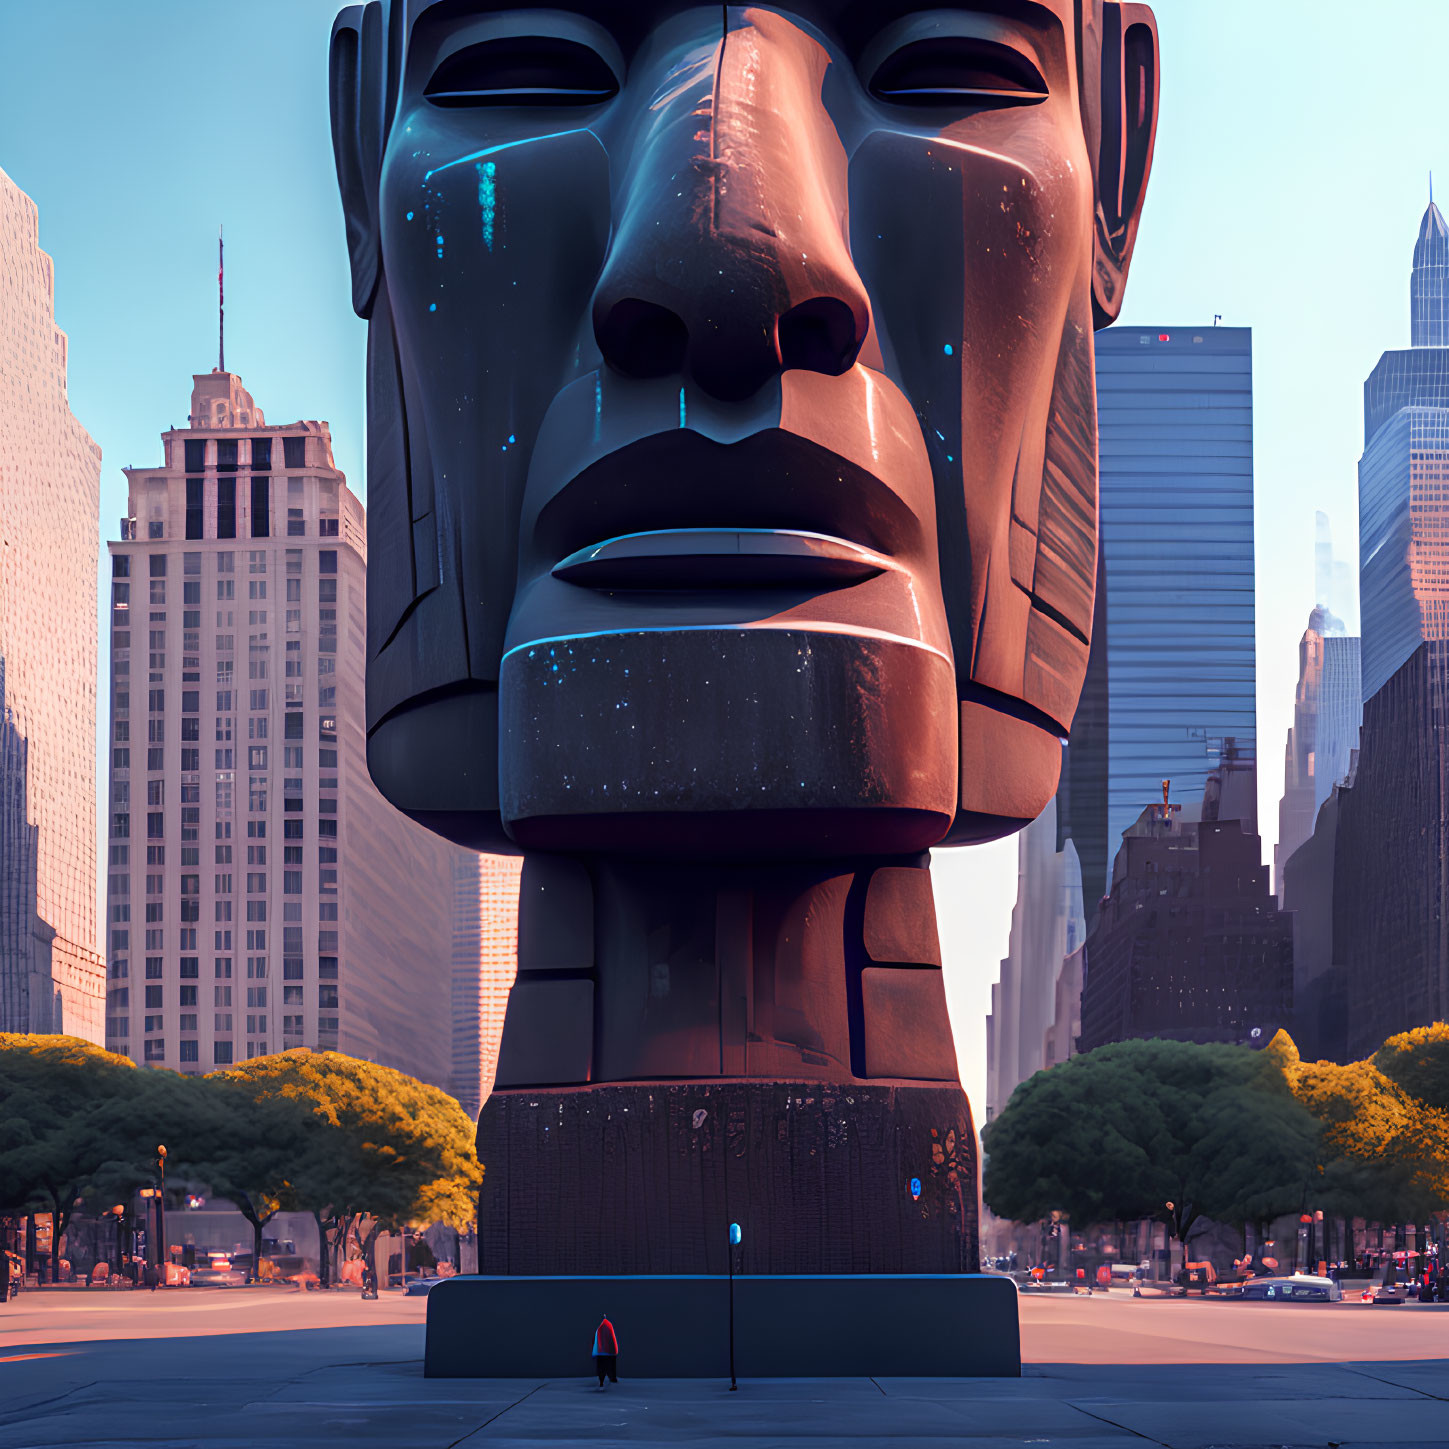 Giant futuristic head sculpture with cosmic texture in urban plaza